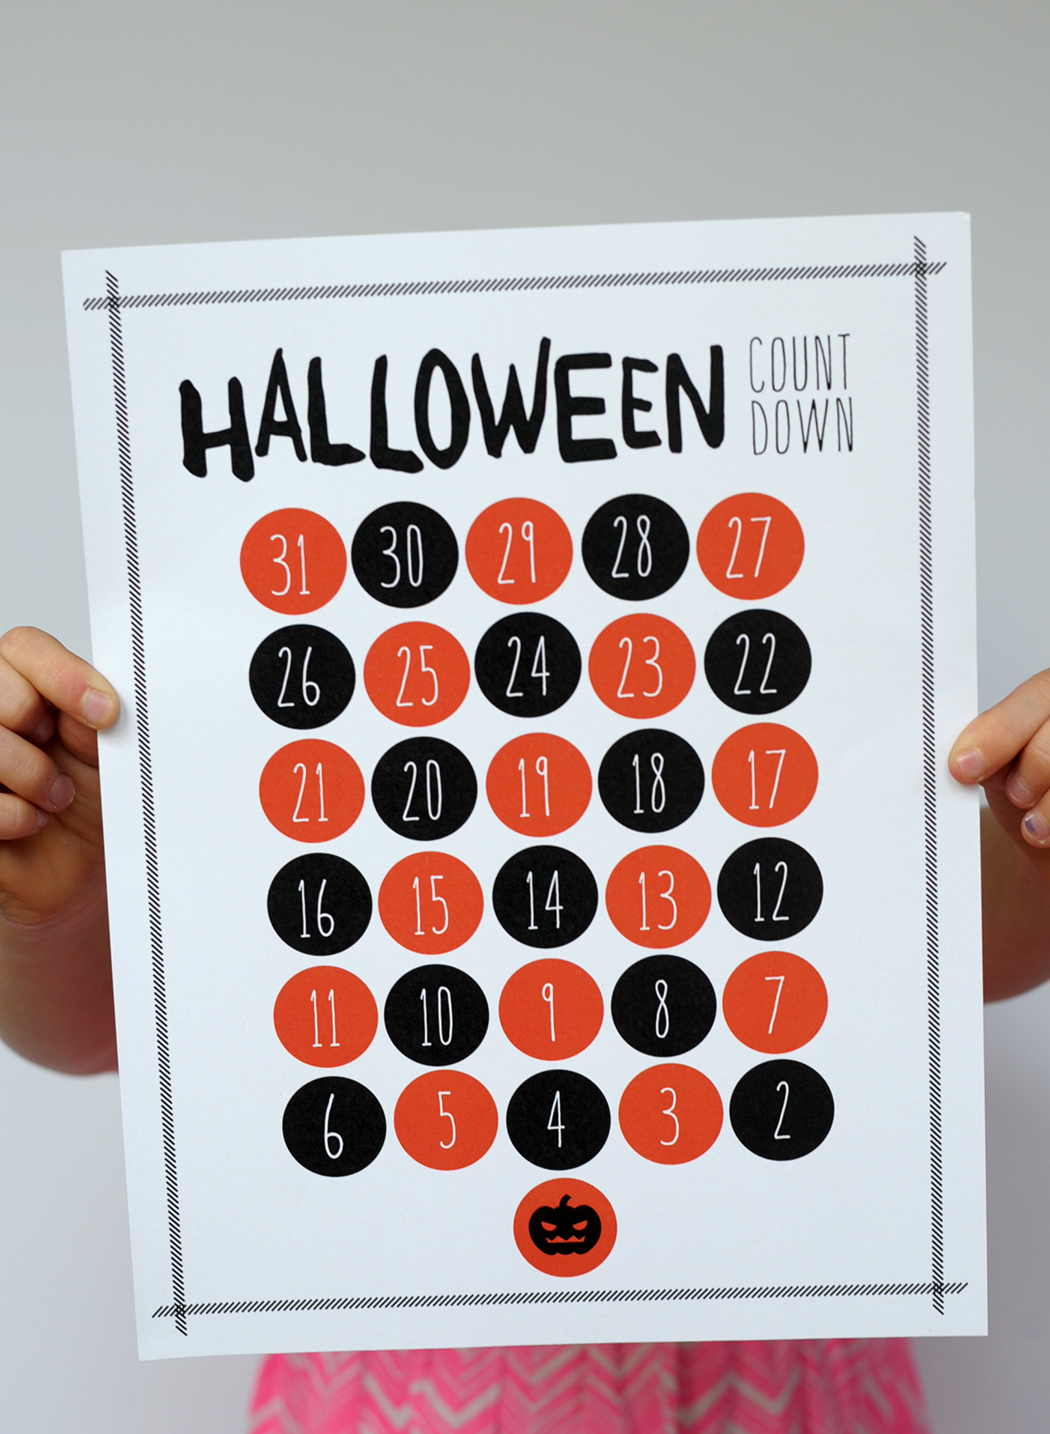 count down the days until halloween with this free printable countdown on aliceandlois.com